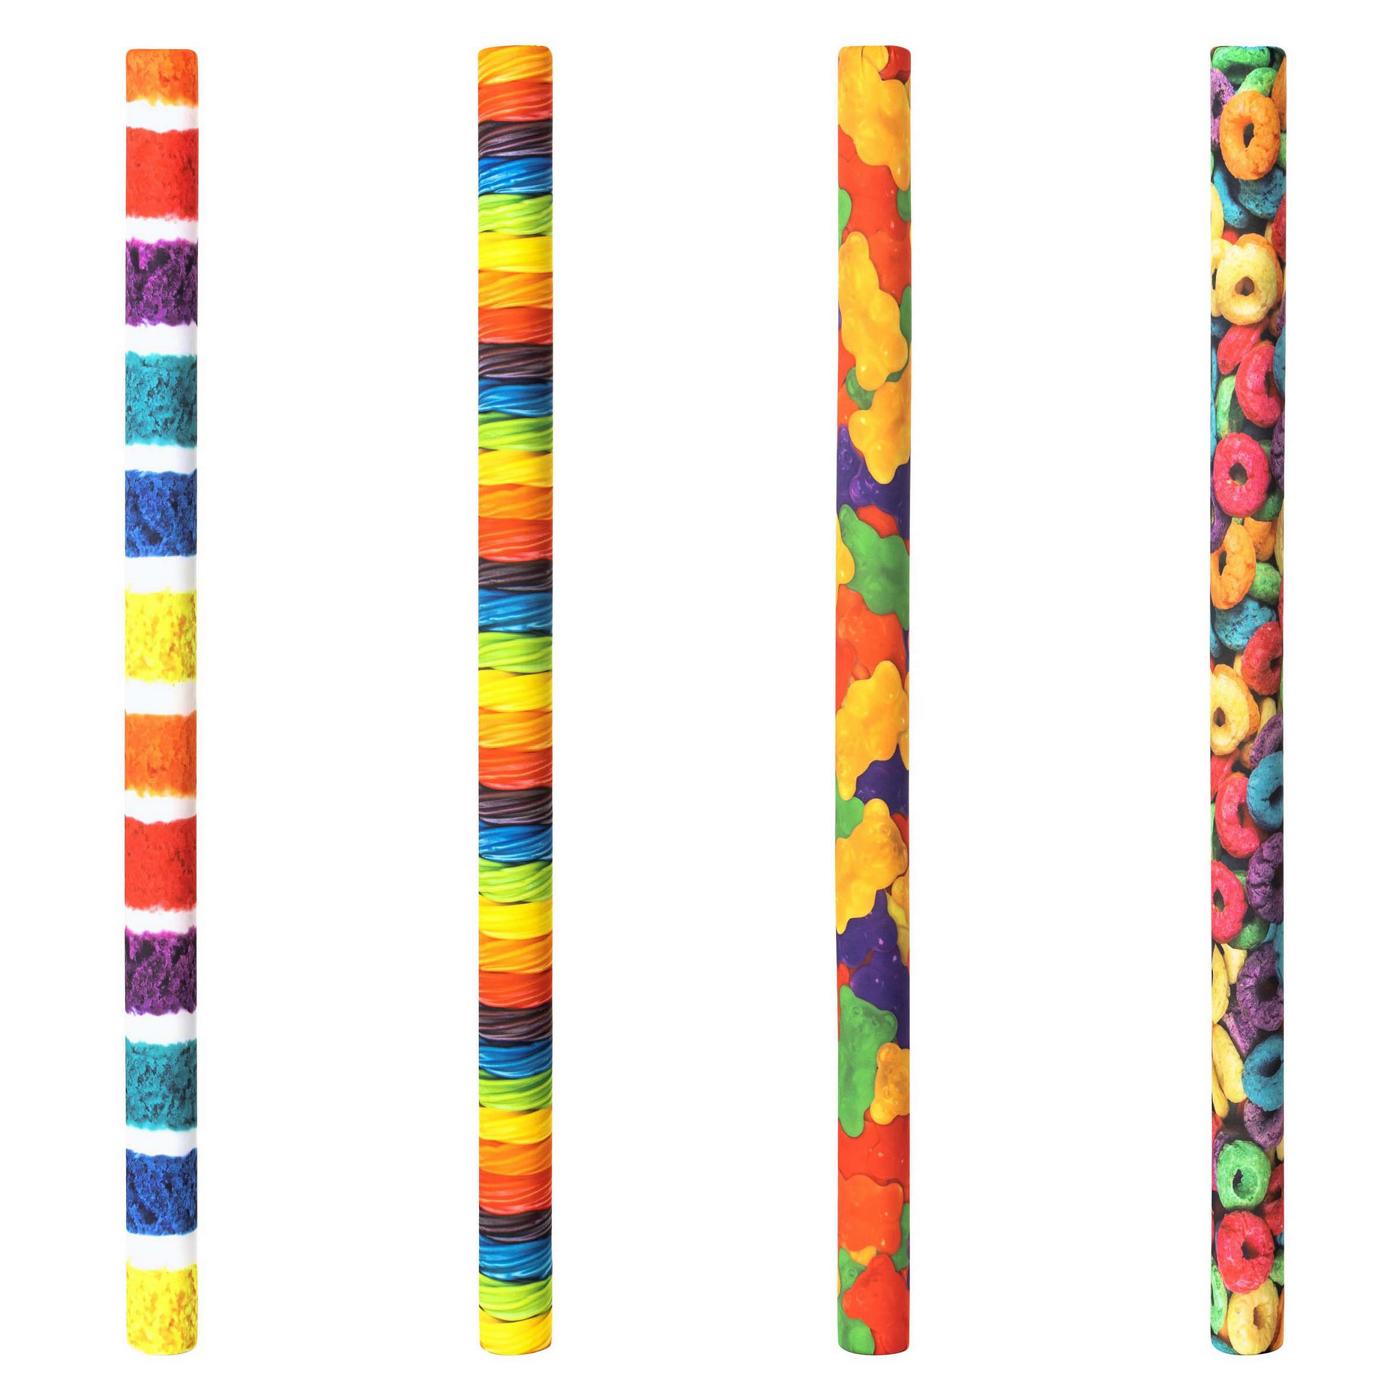 H2OGo! Fabric Cover Sugarcoated Pool Noodles, Assorted; image 1 of 3